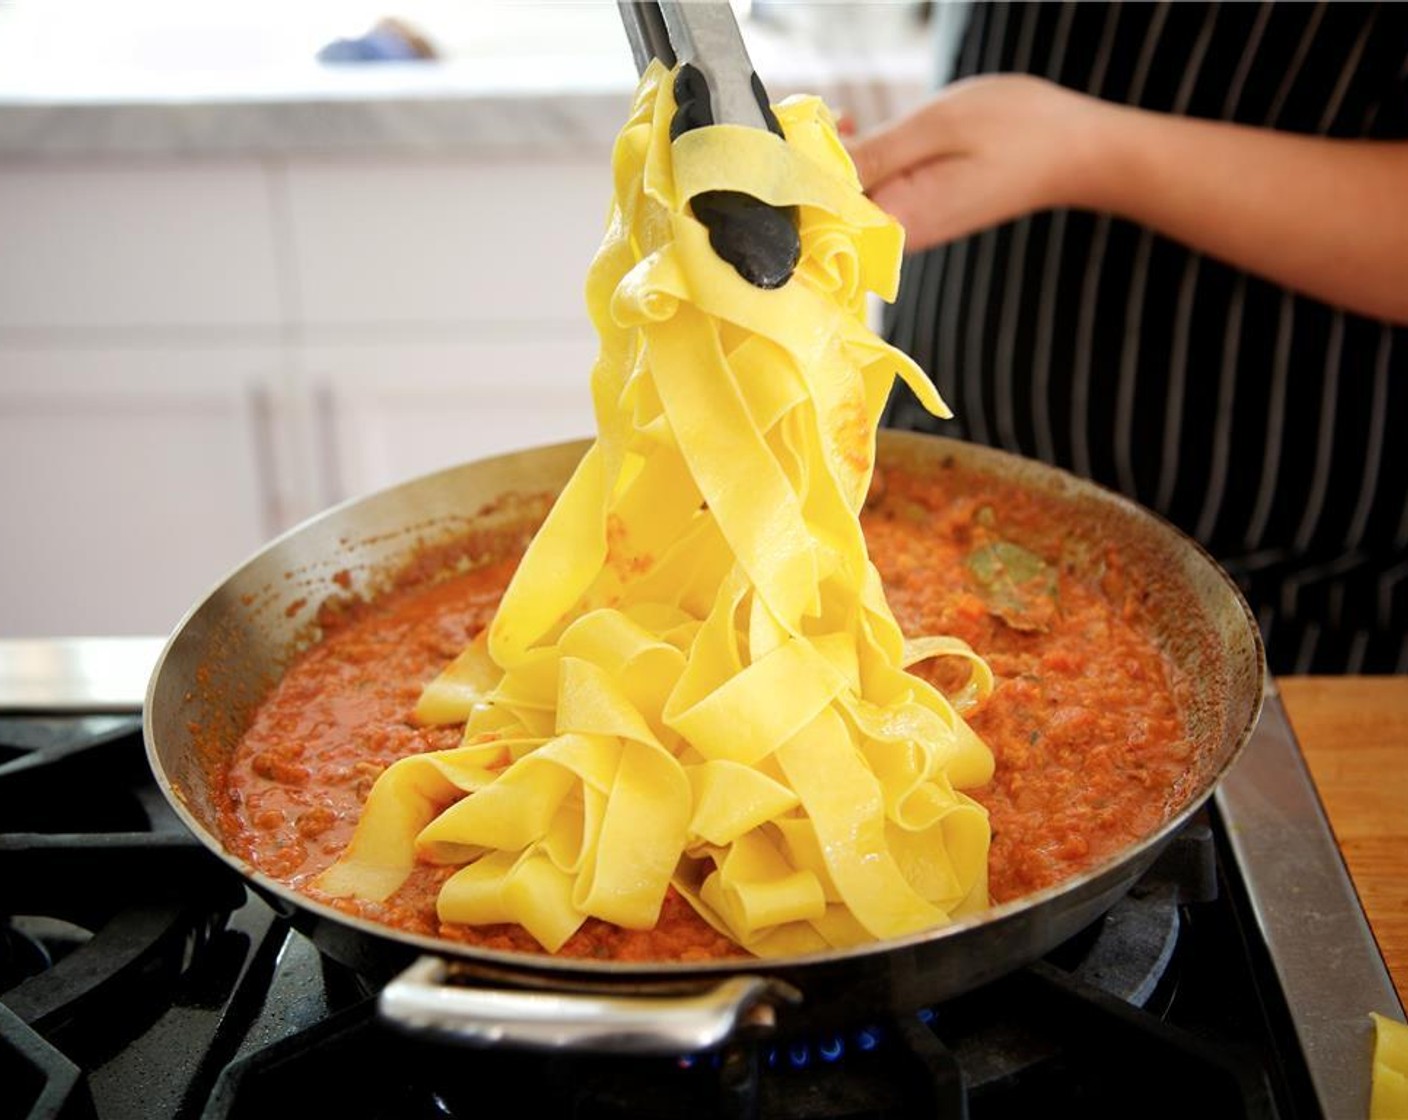 step 15 Drain pappardelle pasta into a colander. Add the pappardelle and chopped parsley to the simmering sauce and toss until all pasta is well coated. Remove from heat and keep warm until plating.